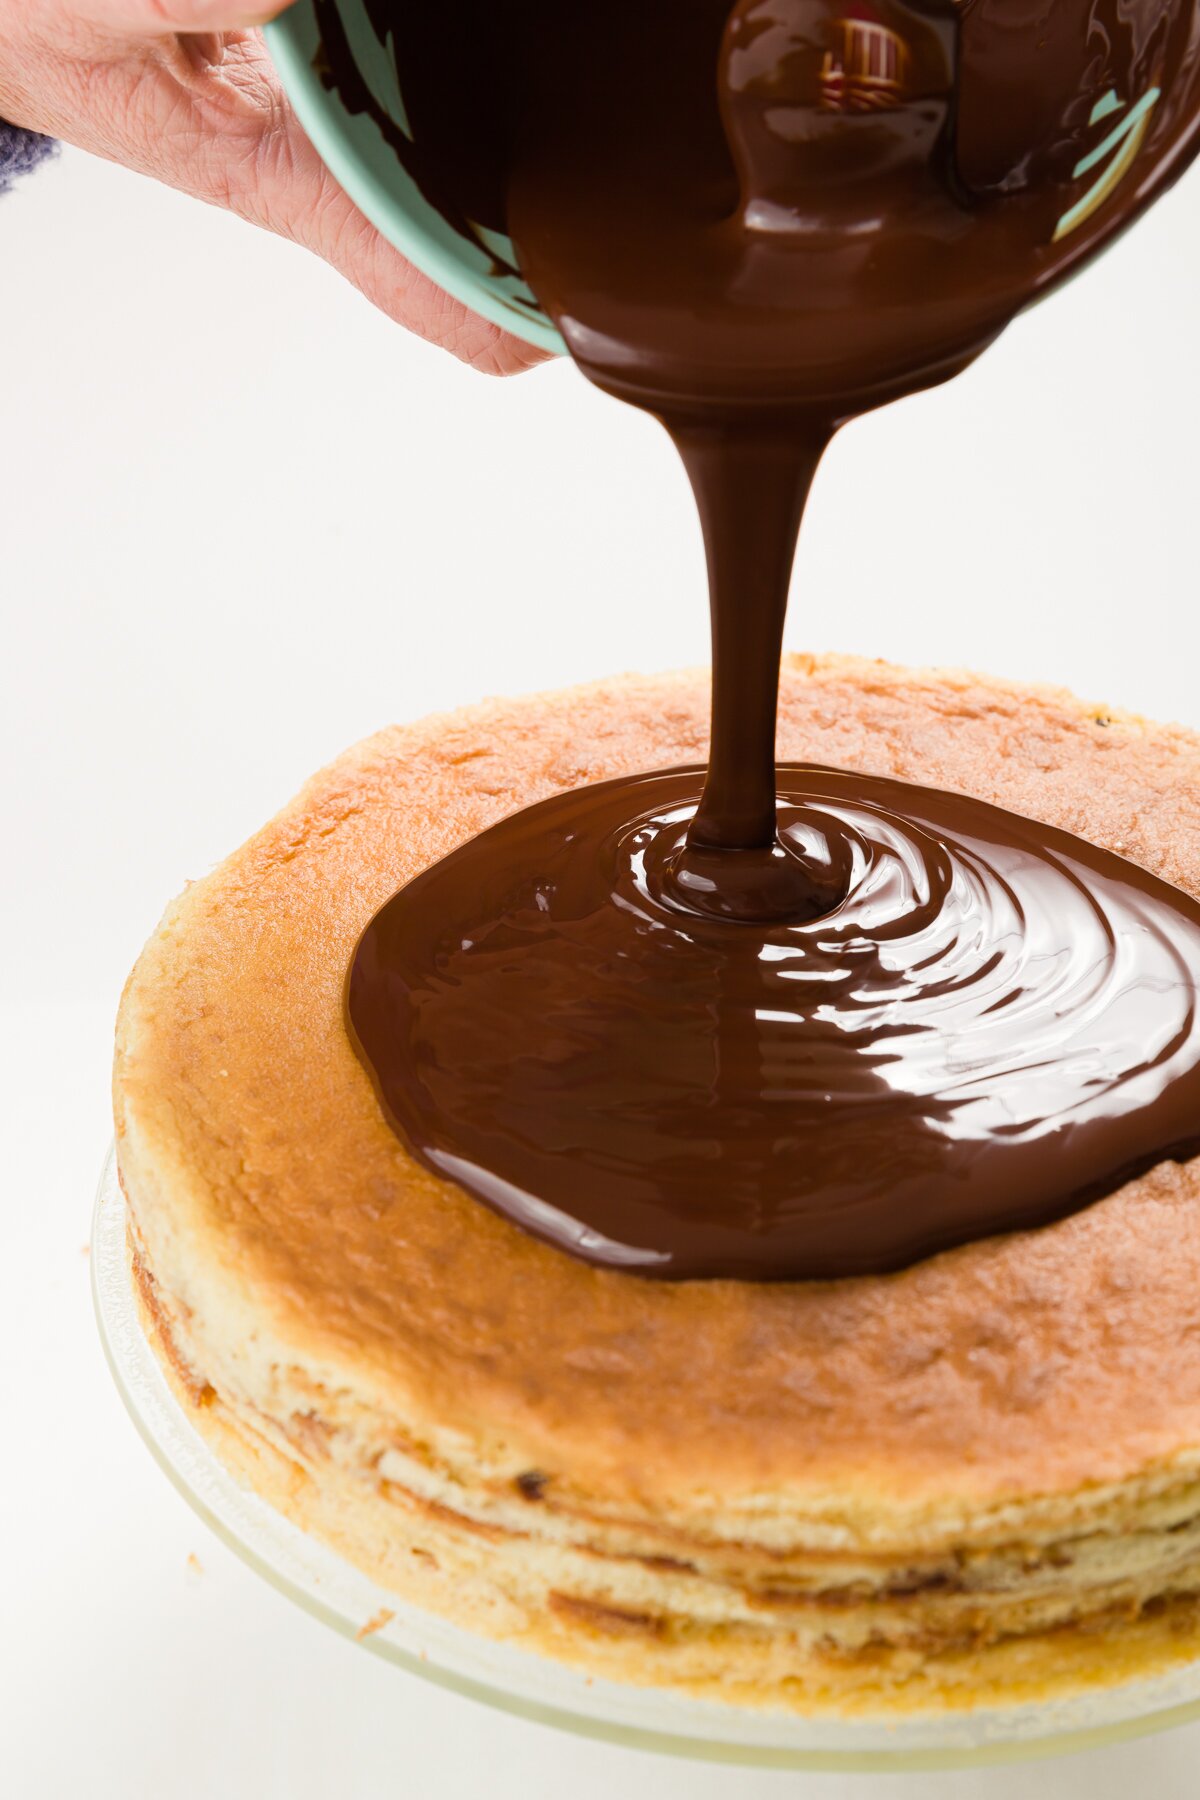 Pouring chocolate over top of a cake